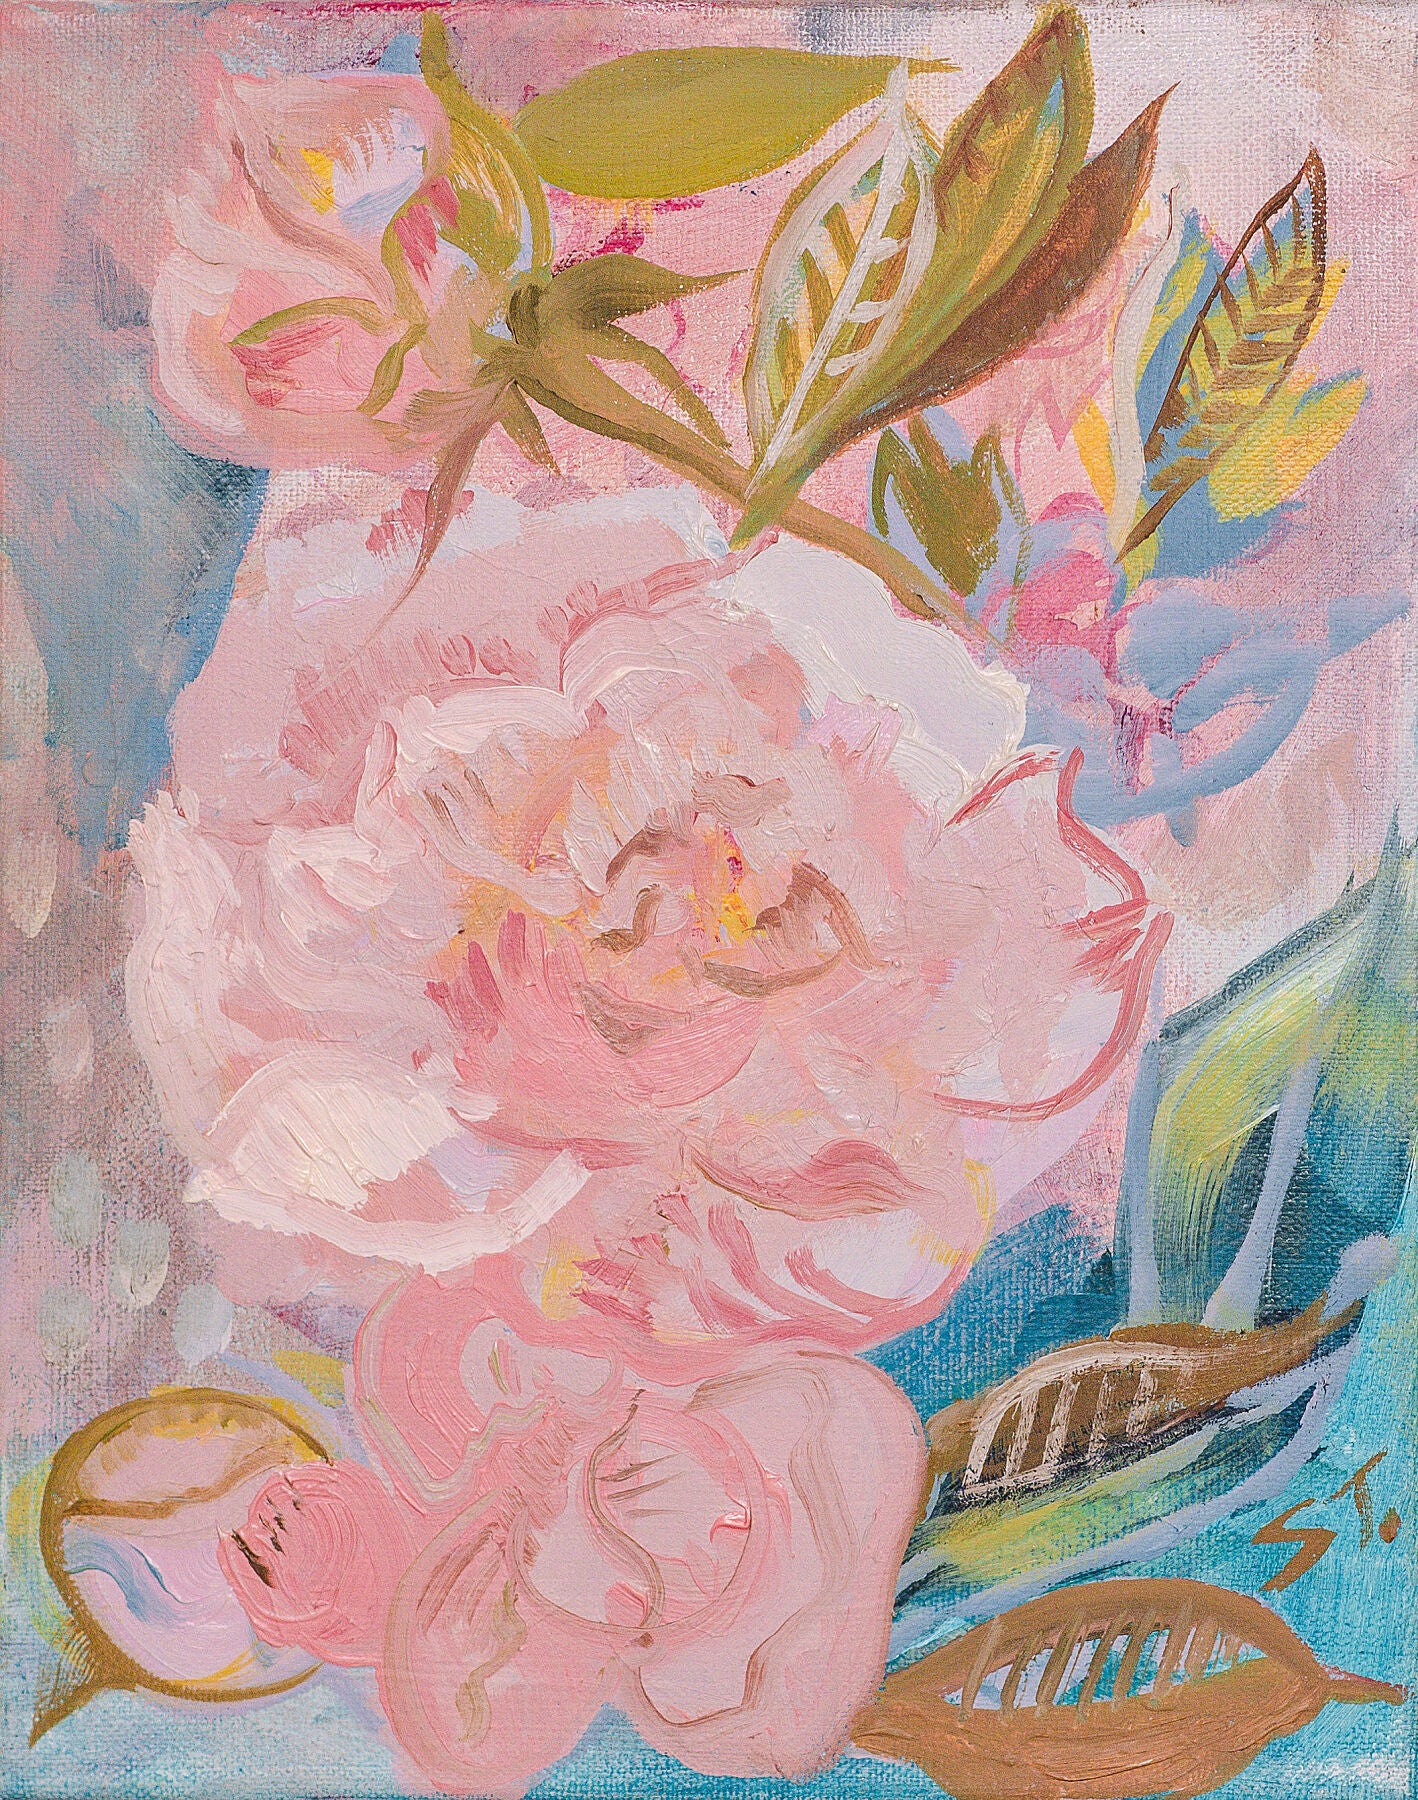 PRINT "Spring Peonies" A Vertical Fine Art Giclee Reproduction